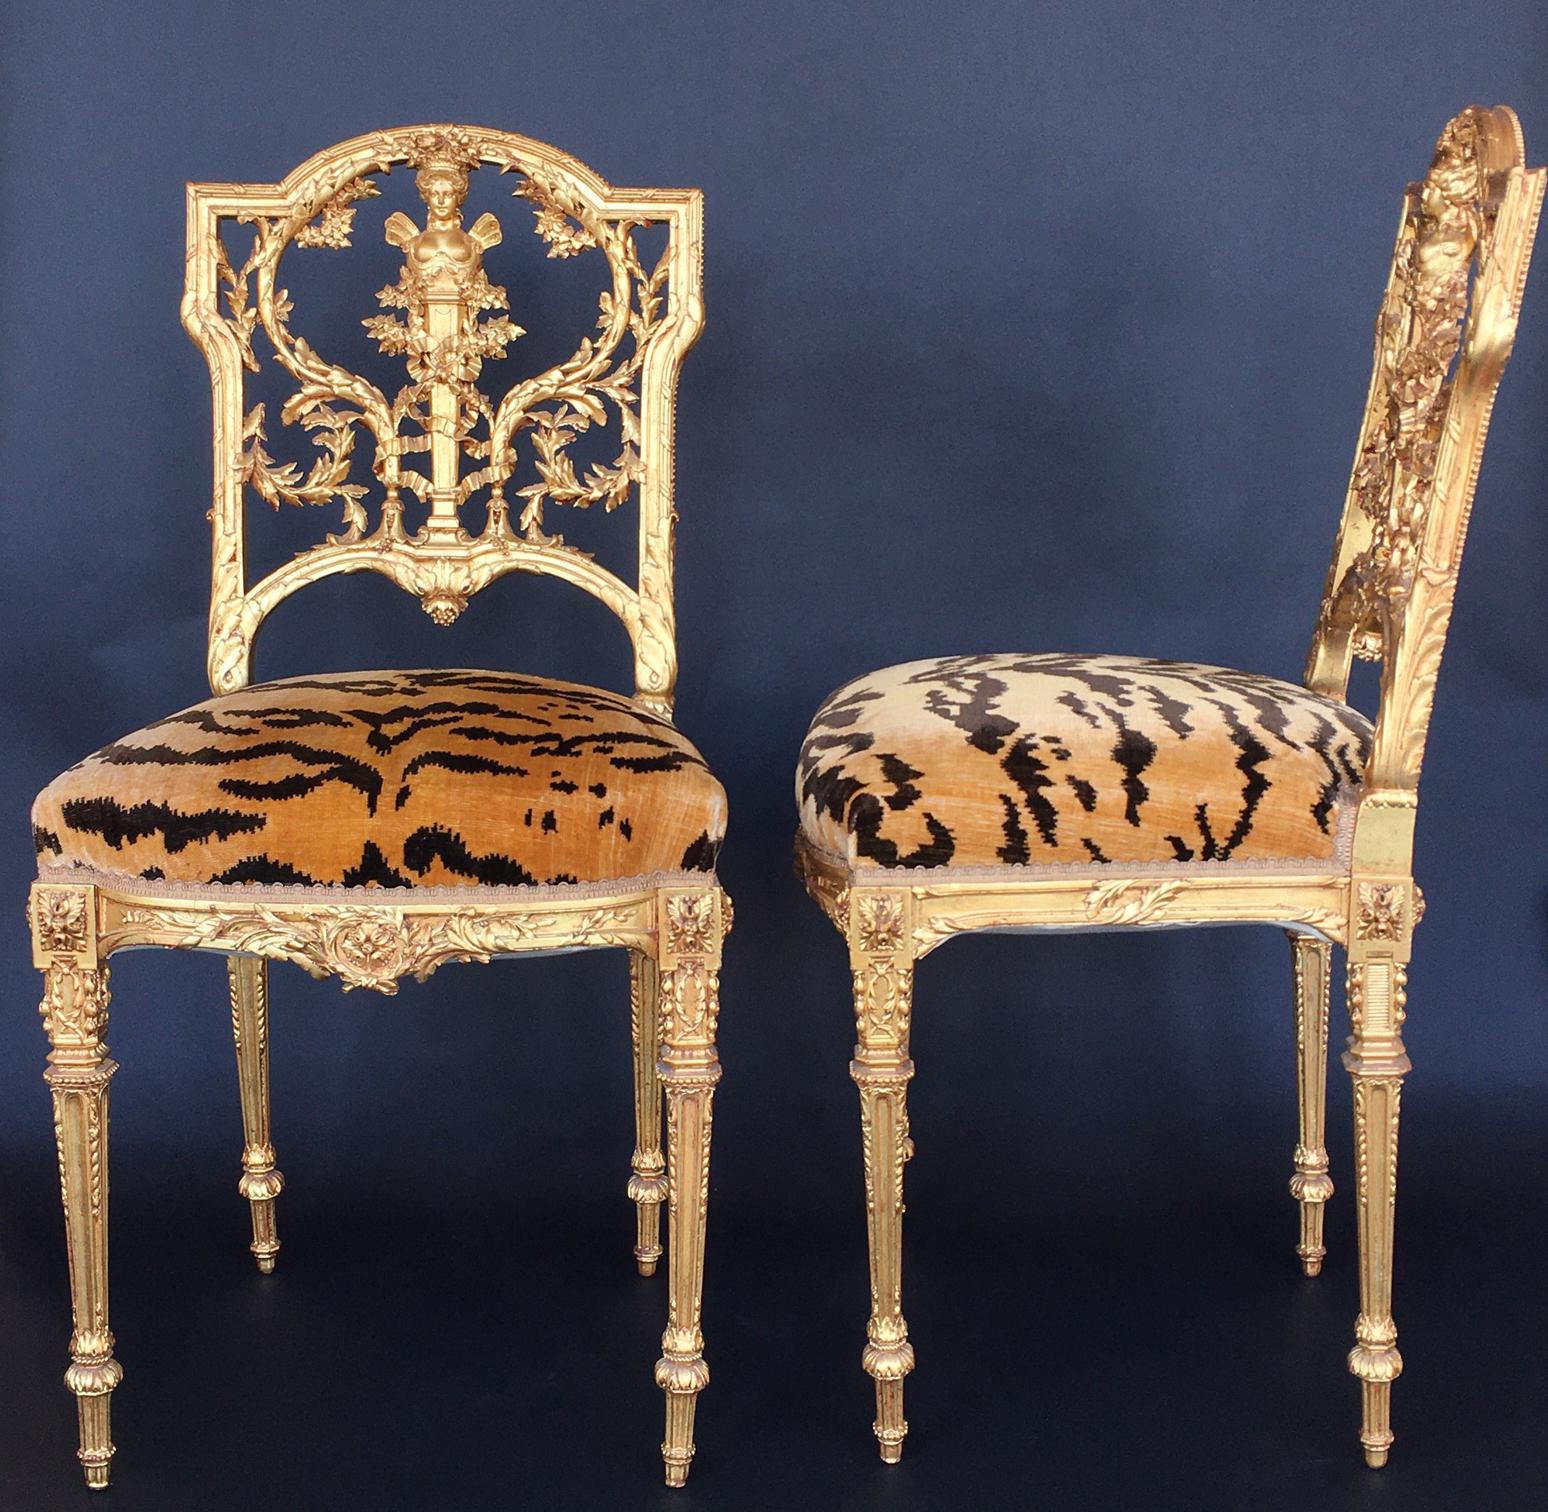 Pair of detailed hand carved giltwood chairs with tiger upholstery.